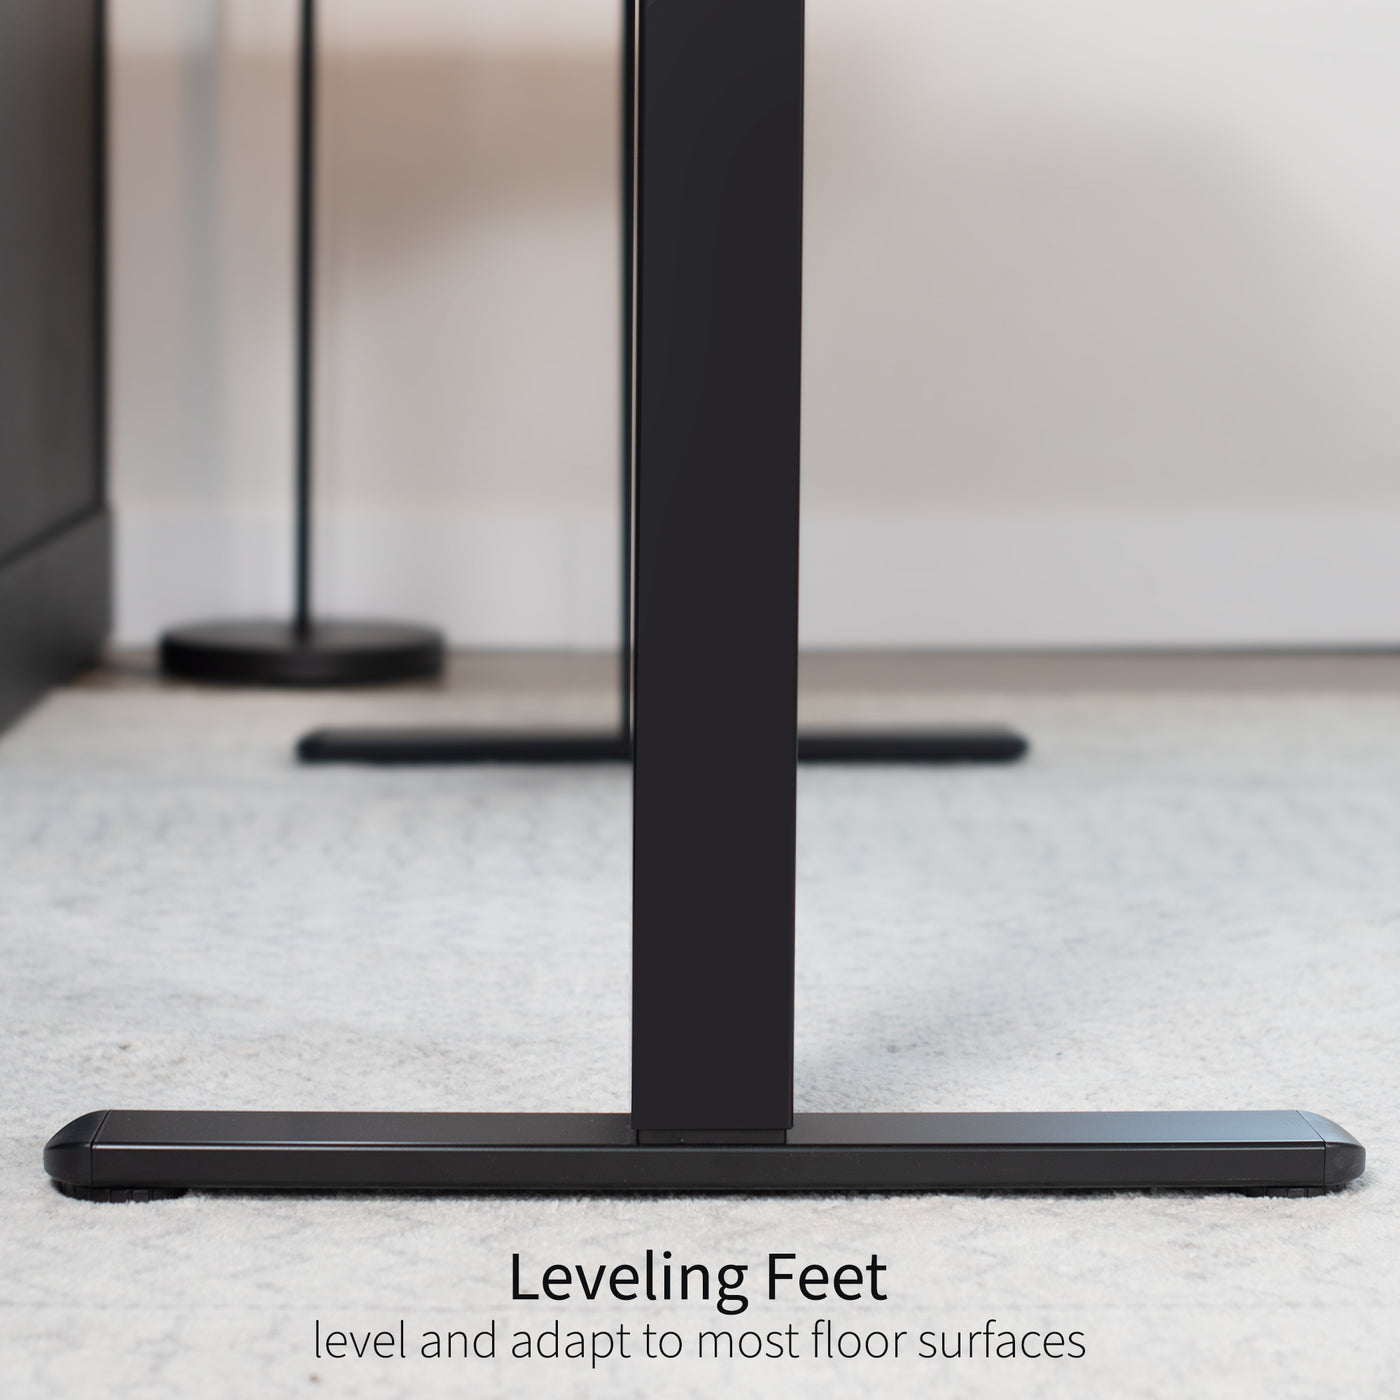 Leveling feet of the desk frame allows for the perfect level set up in any space or on the carpet.